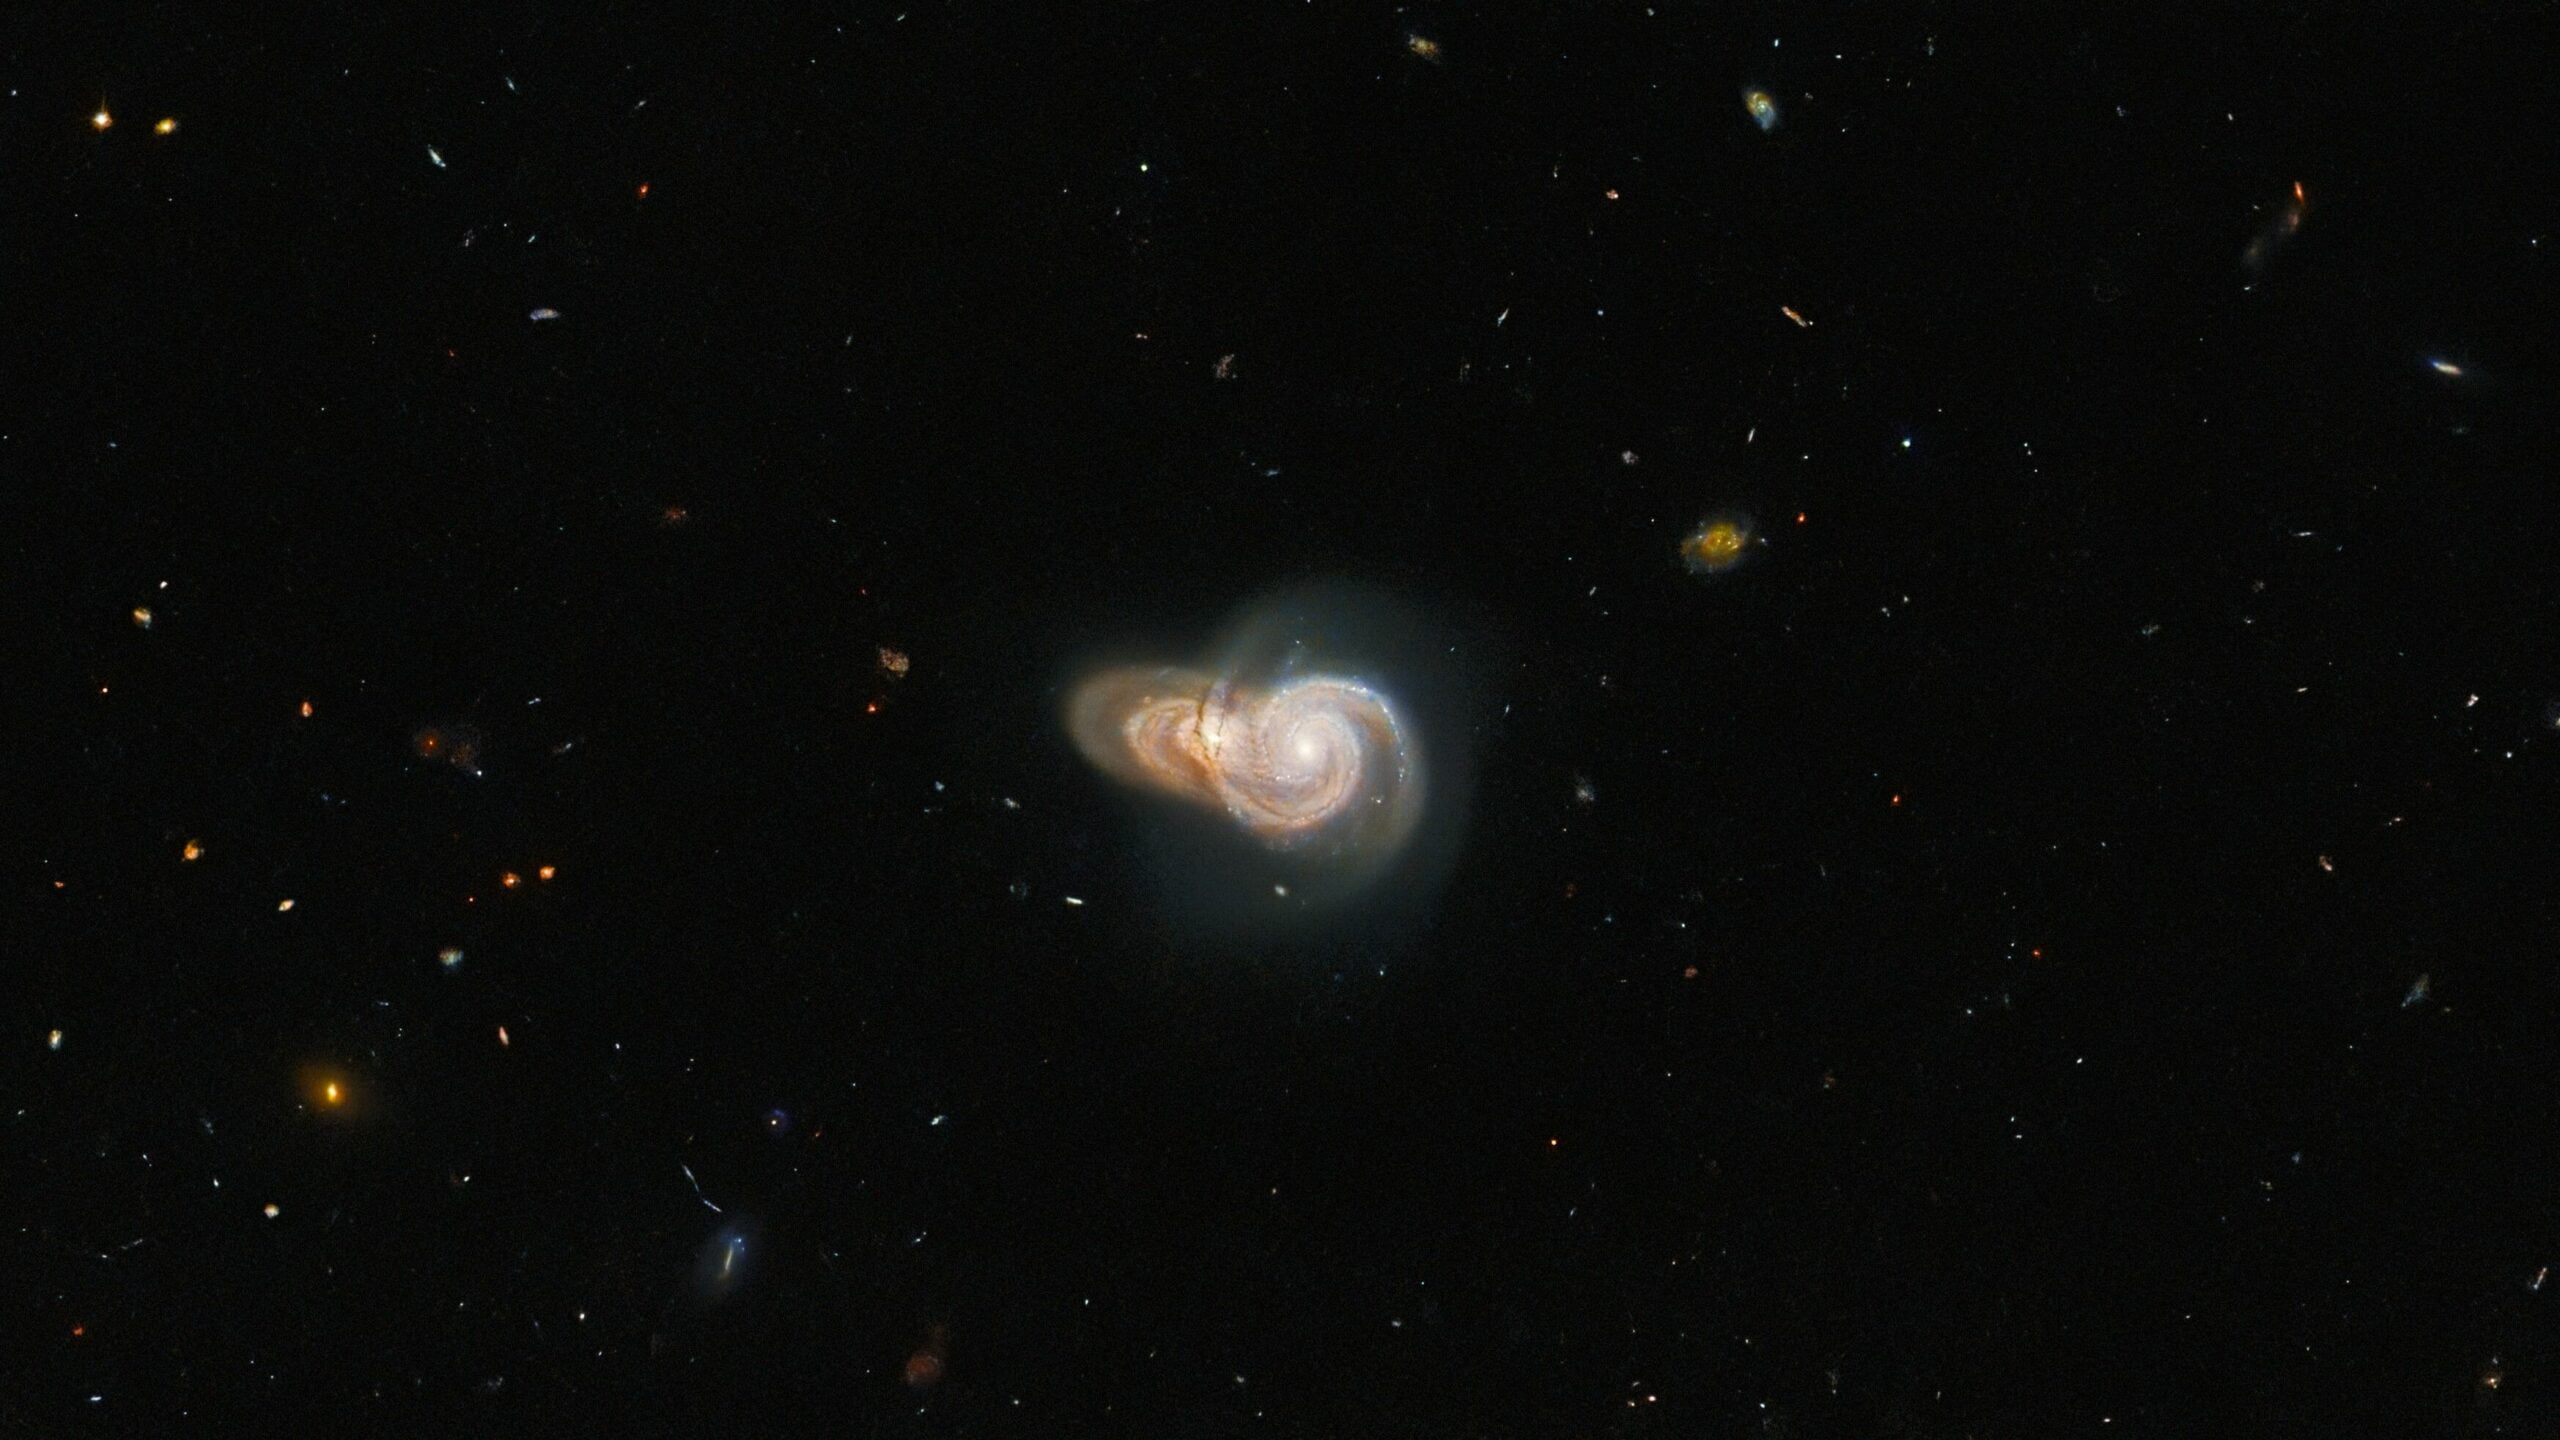 Hubble captures two galaxies overlapping each other to form stunning interstellar snail